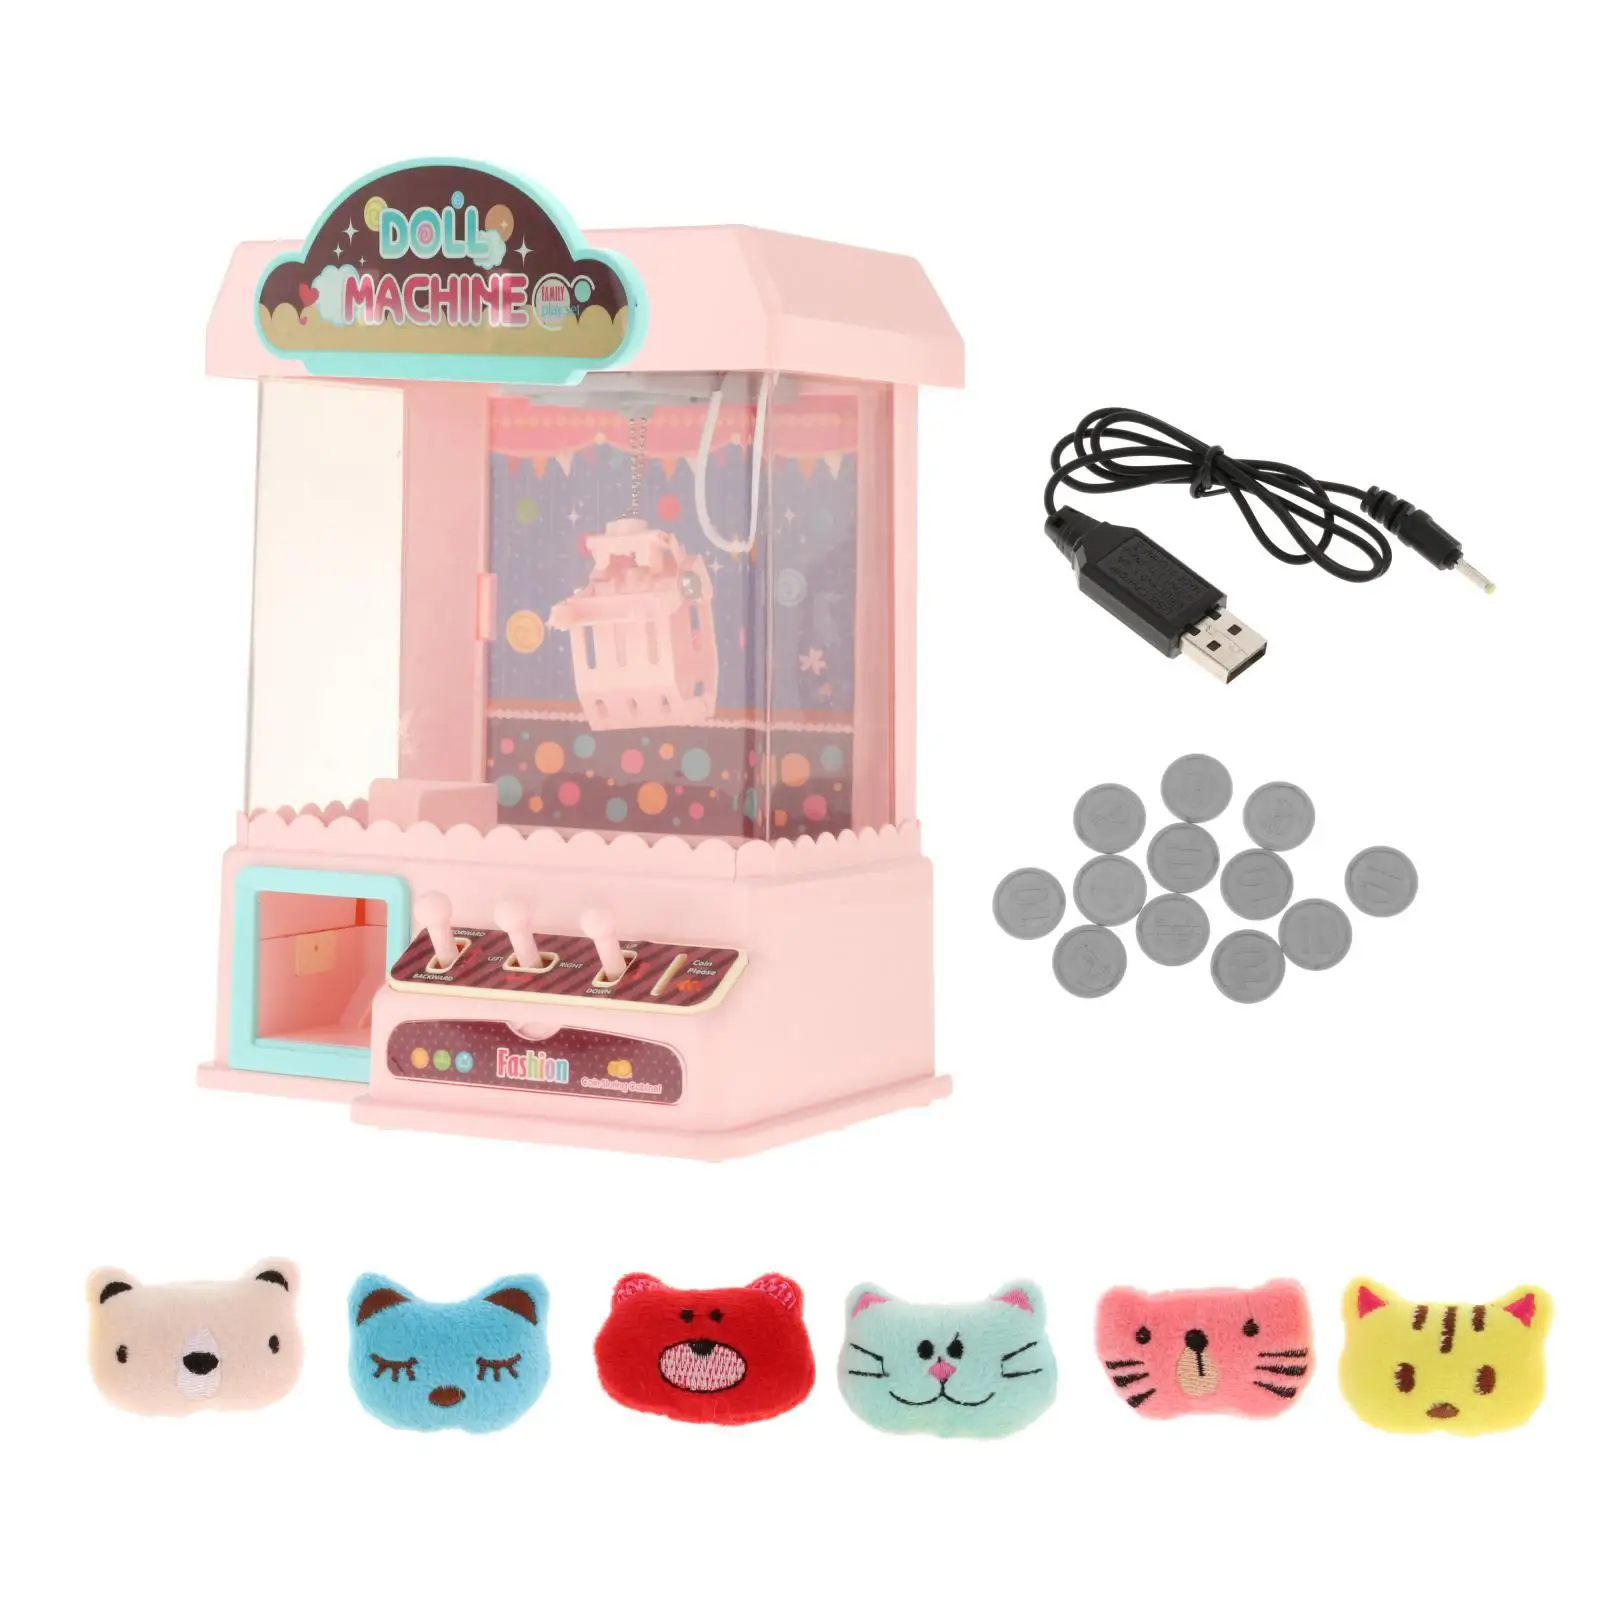 Rechargeable Claw Machine with 6 Dolls Vending Grabber Machine for Children